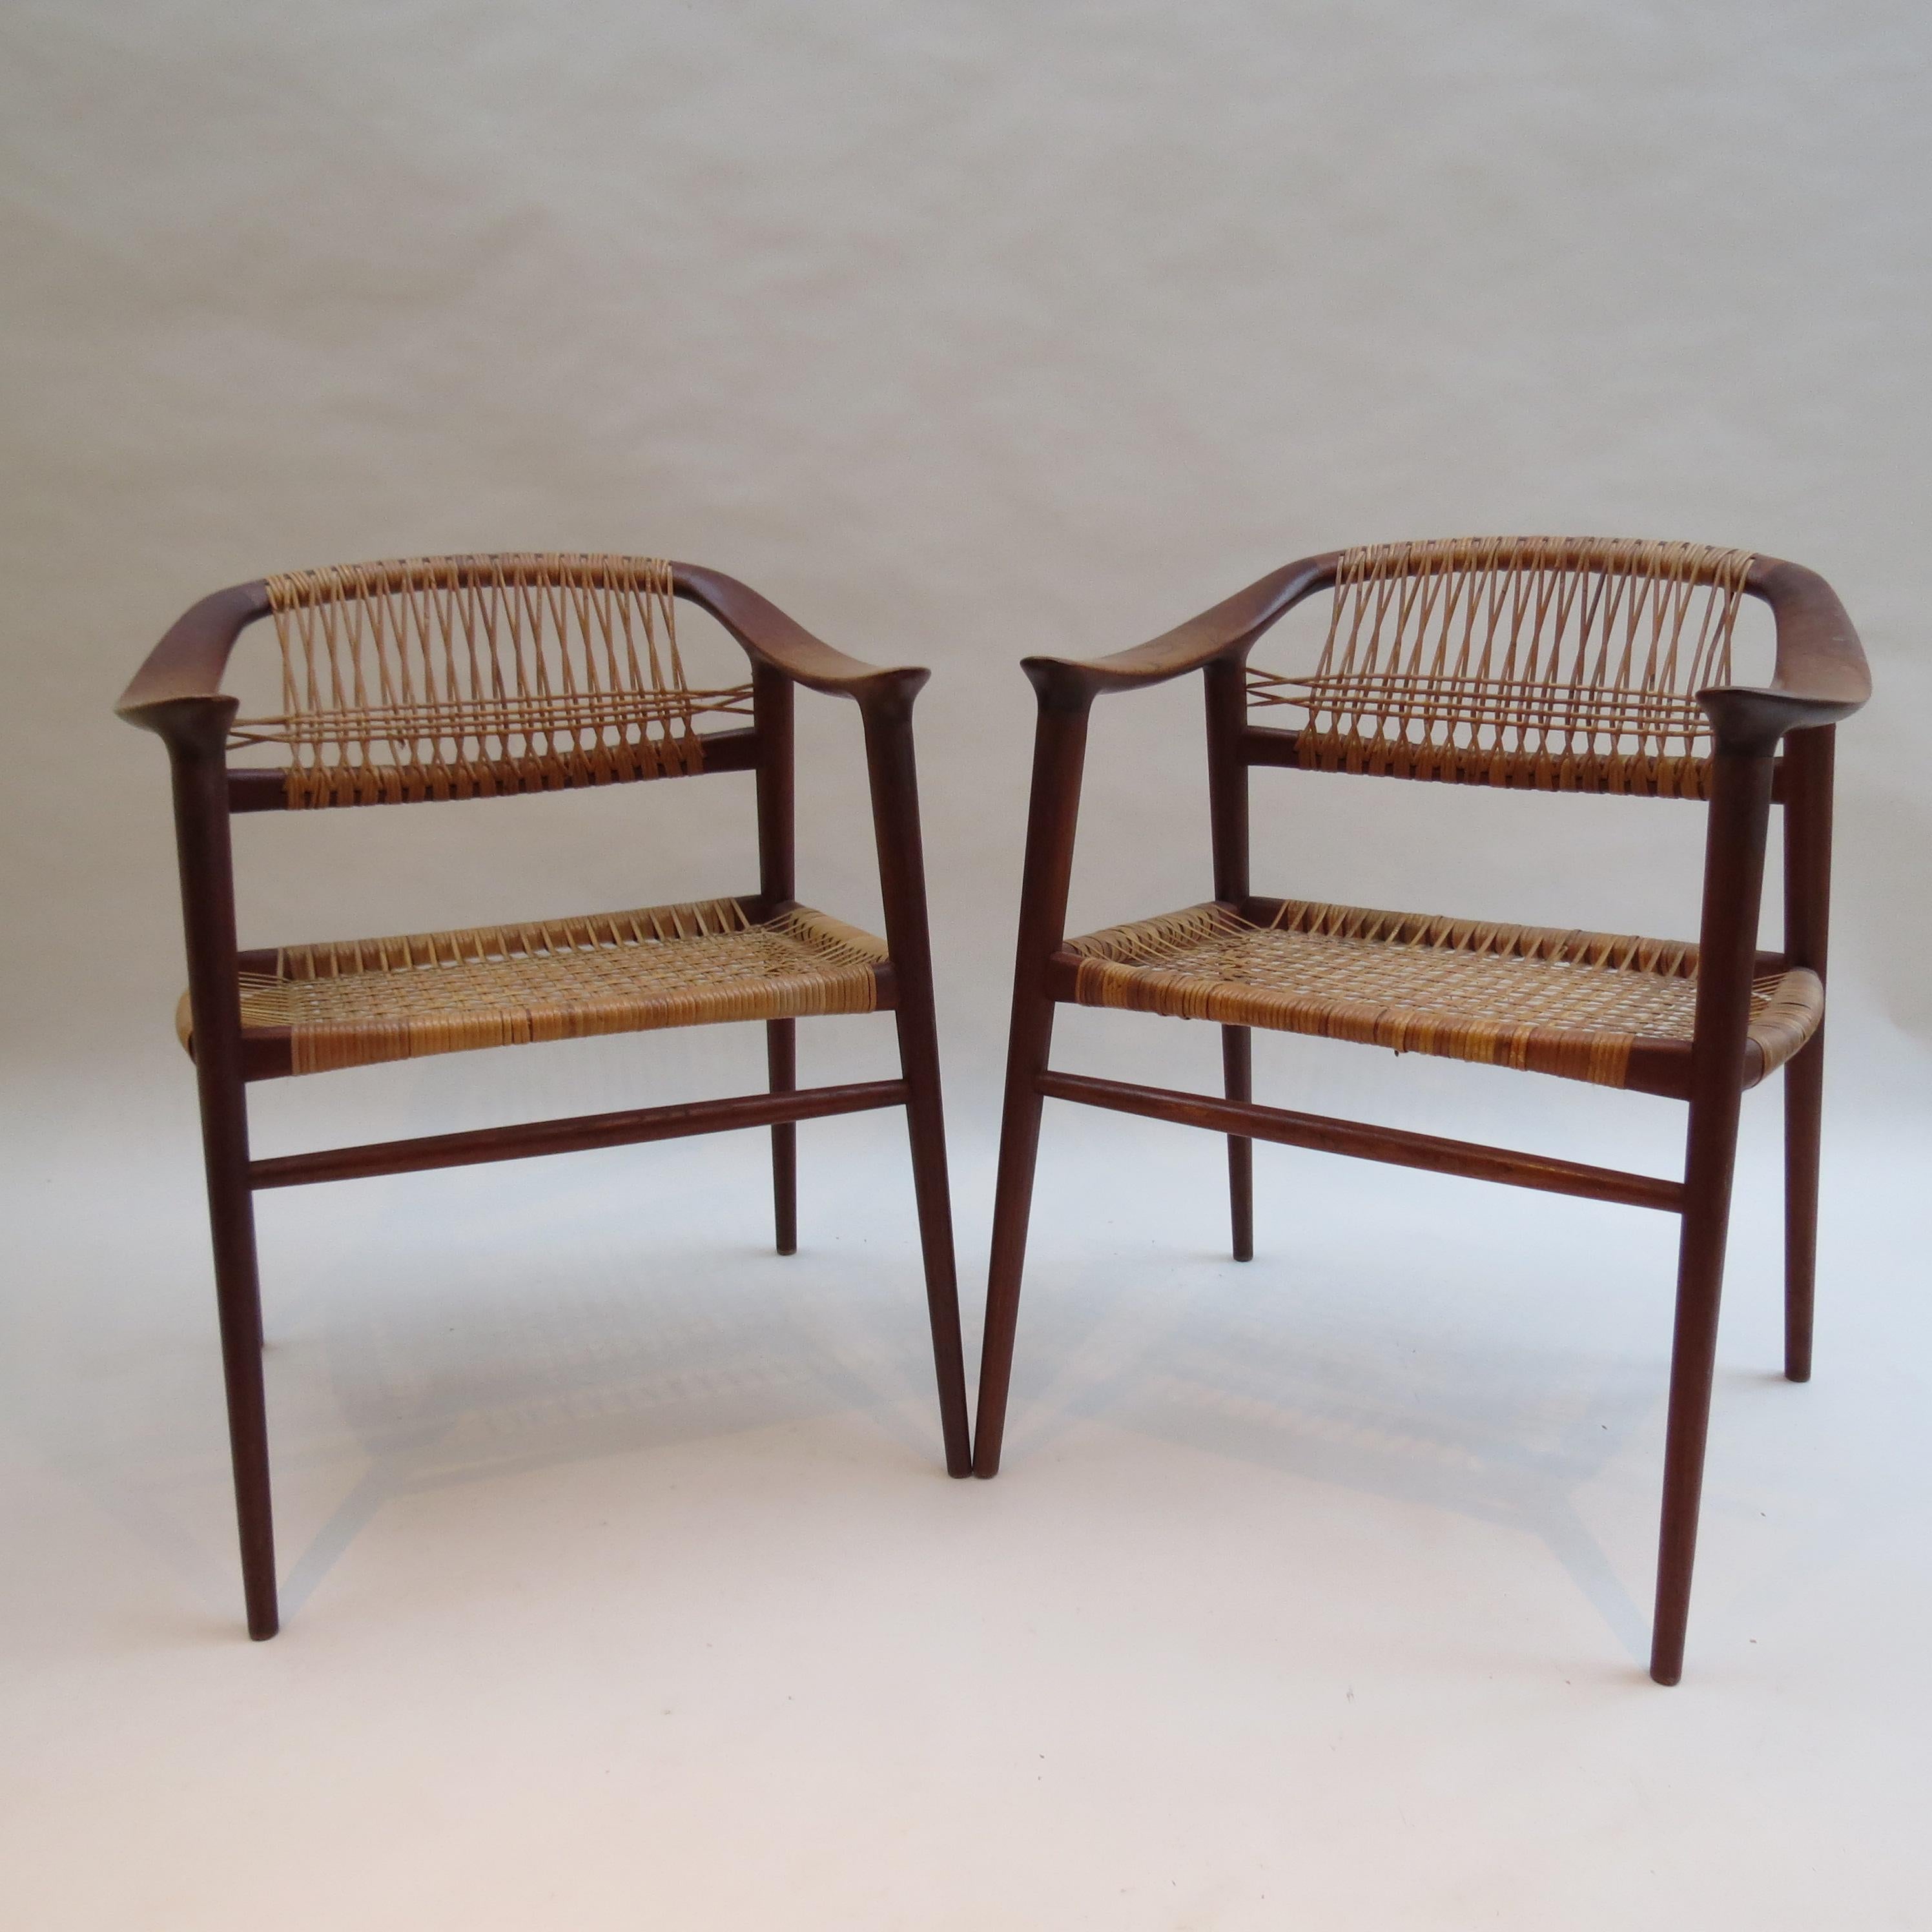 A rare set of 6 dining chairs designed by Rolf Rastad and Adolf Relling and manufactured by Gustav Bahus of Norway. Designed in the 1950s.
Made from solid Teak with original cane work seat and backs.
This set was purchased new and has been with